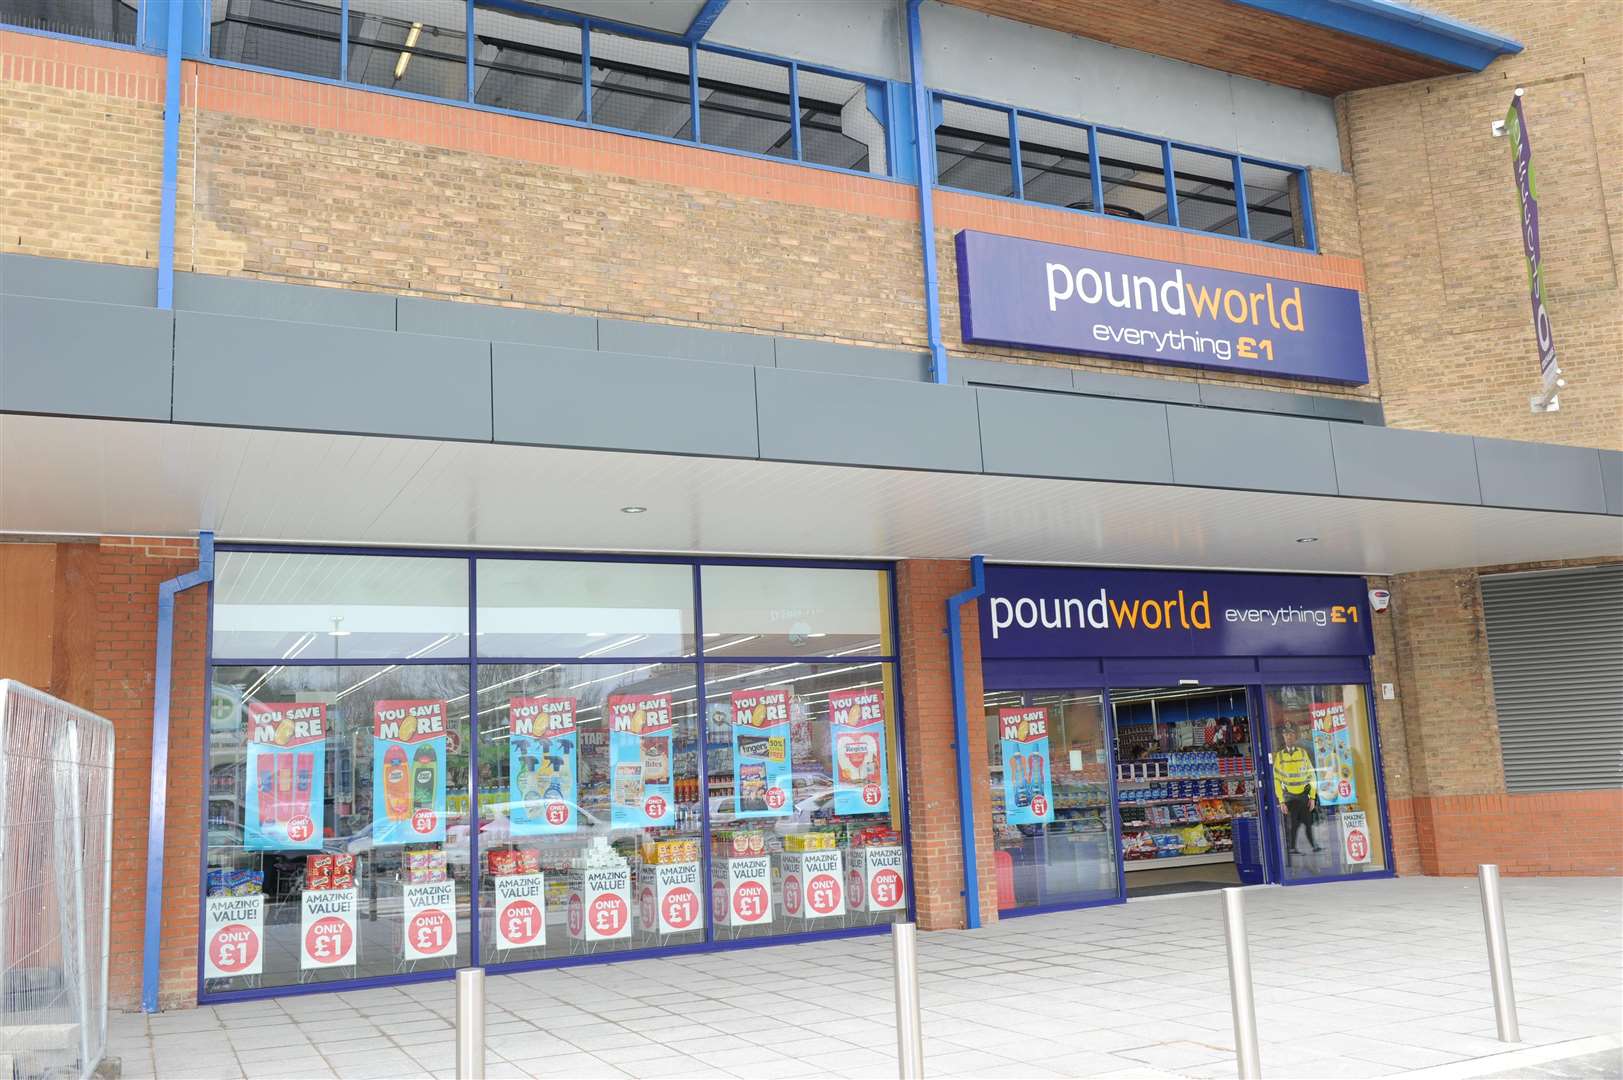 Poundworld at Orchards Shopping Centre in Dartford